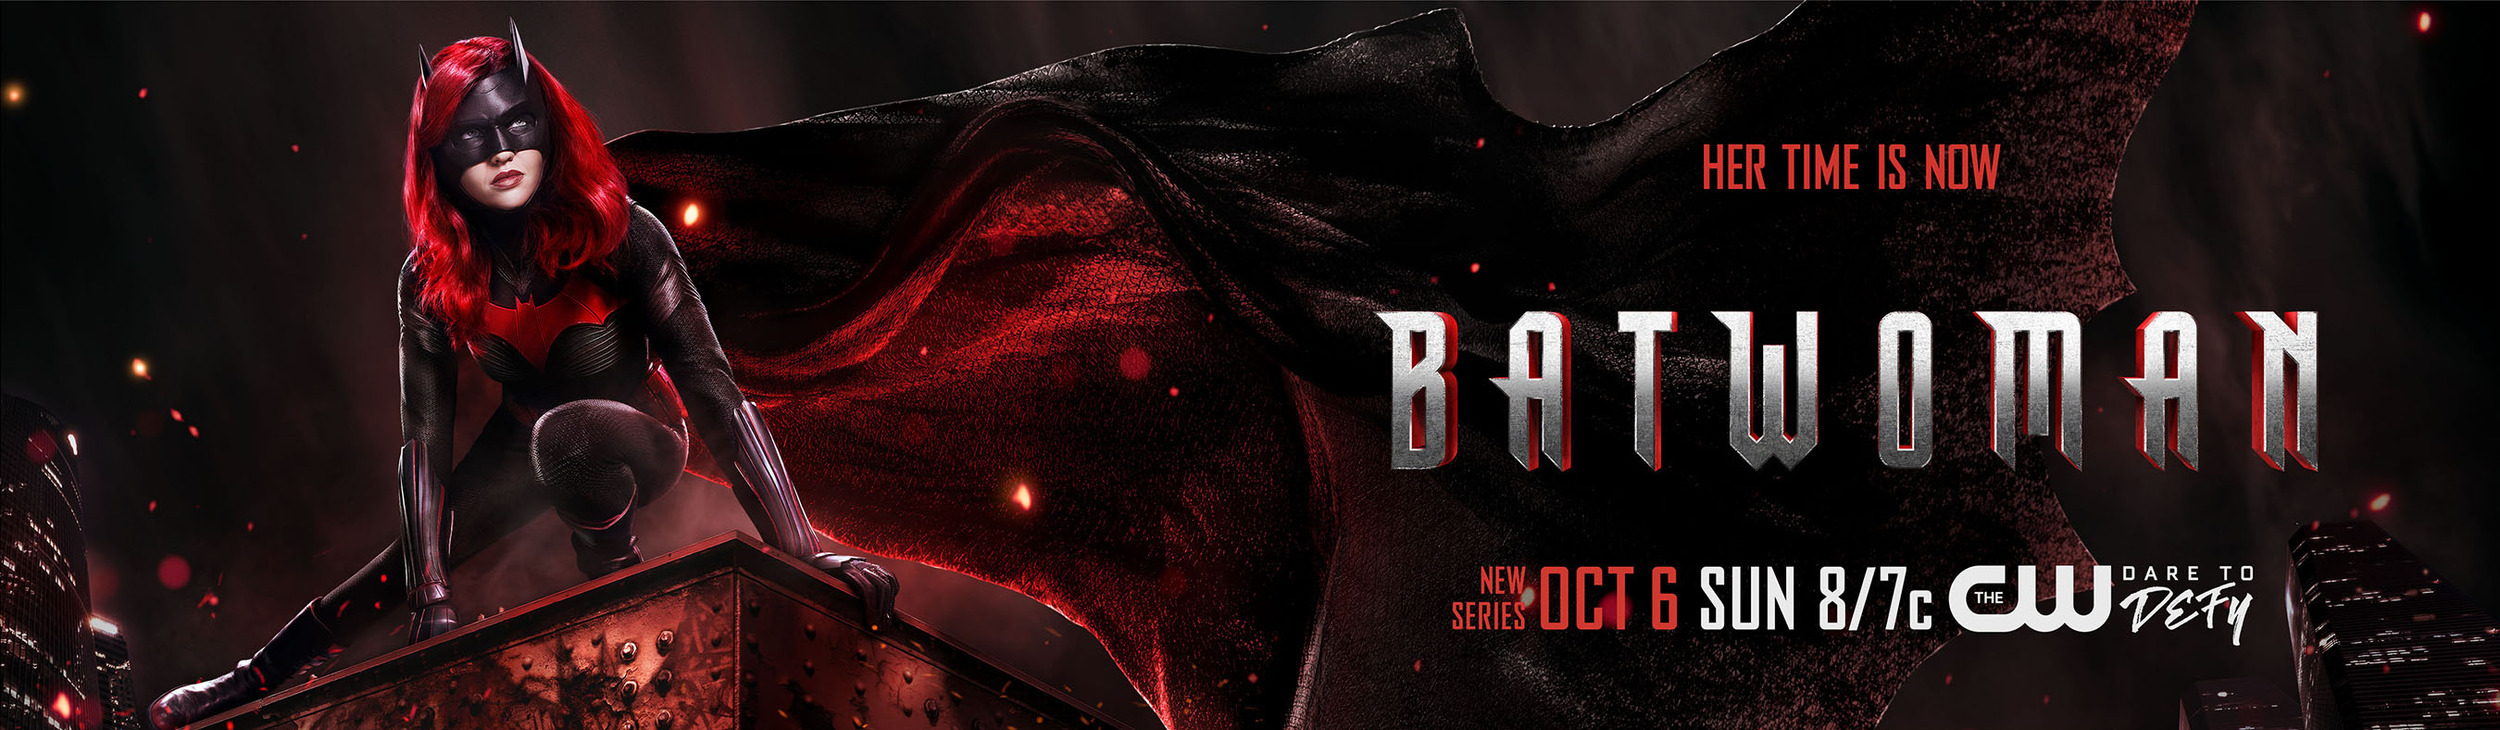 Mega Sized Movie Poster Image for Batwoman (#5 of 30)